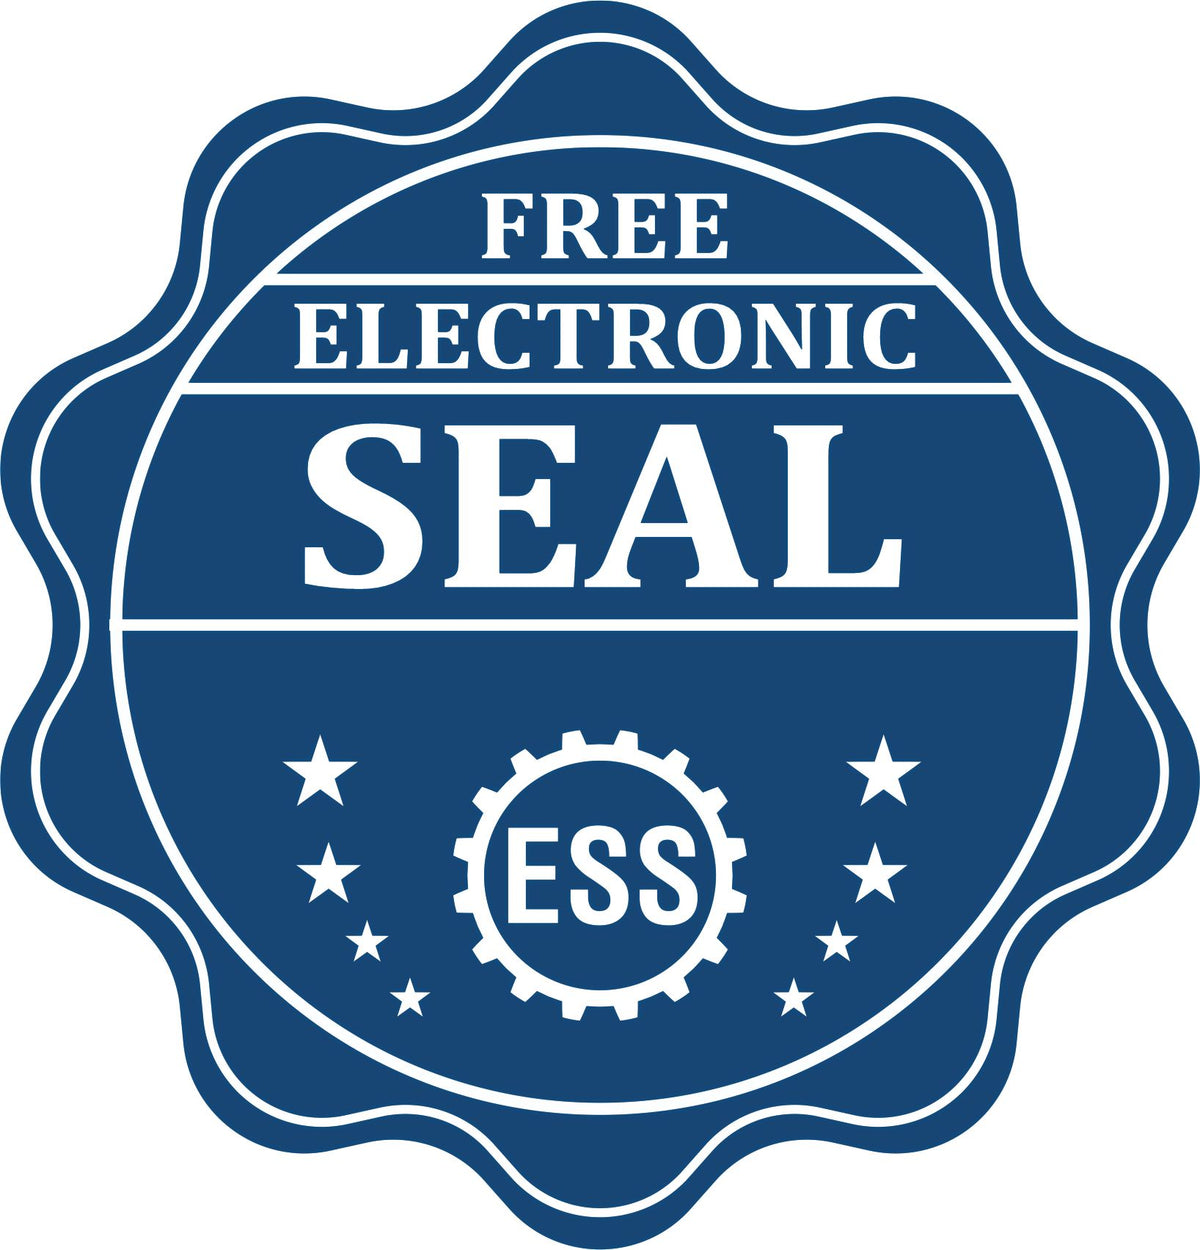 A badge showing a free electronic seal for the Heavy Duty Cast Iron Michigan Engineer Seal Embosser with stars and the ESS gear on the emblem.